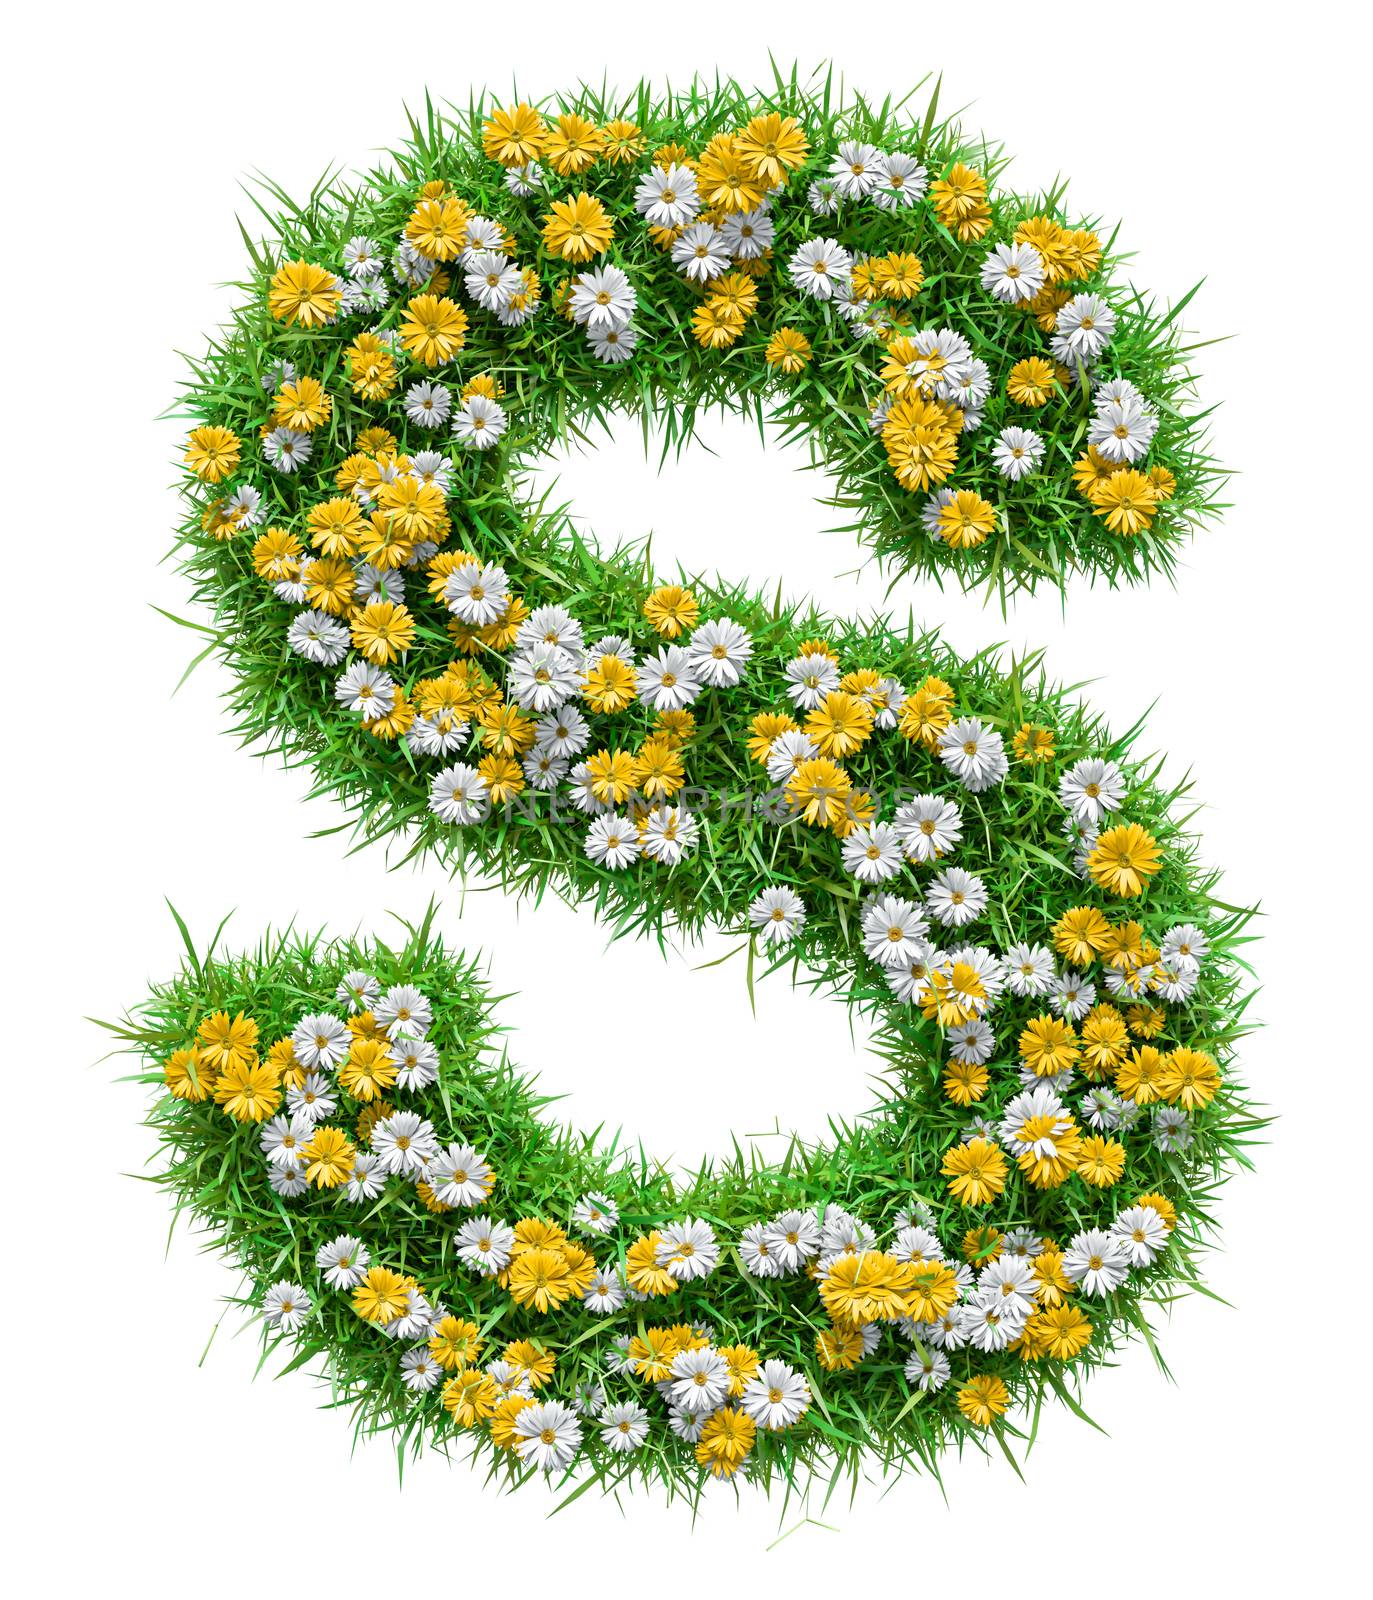 Letter S Of Green Grass And Flowers. Isolated On White Background. Font For Your Design. 3D Illustration